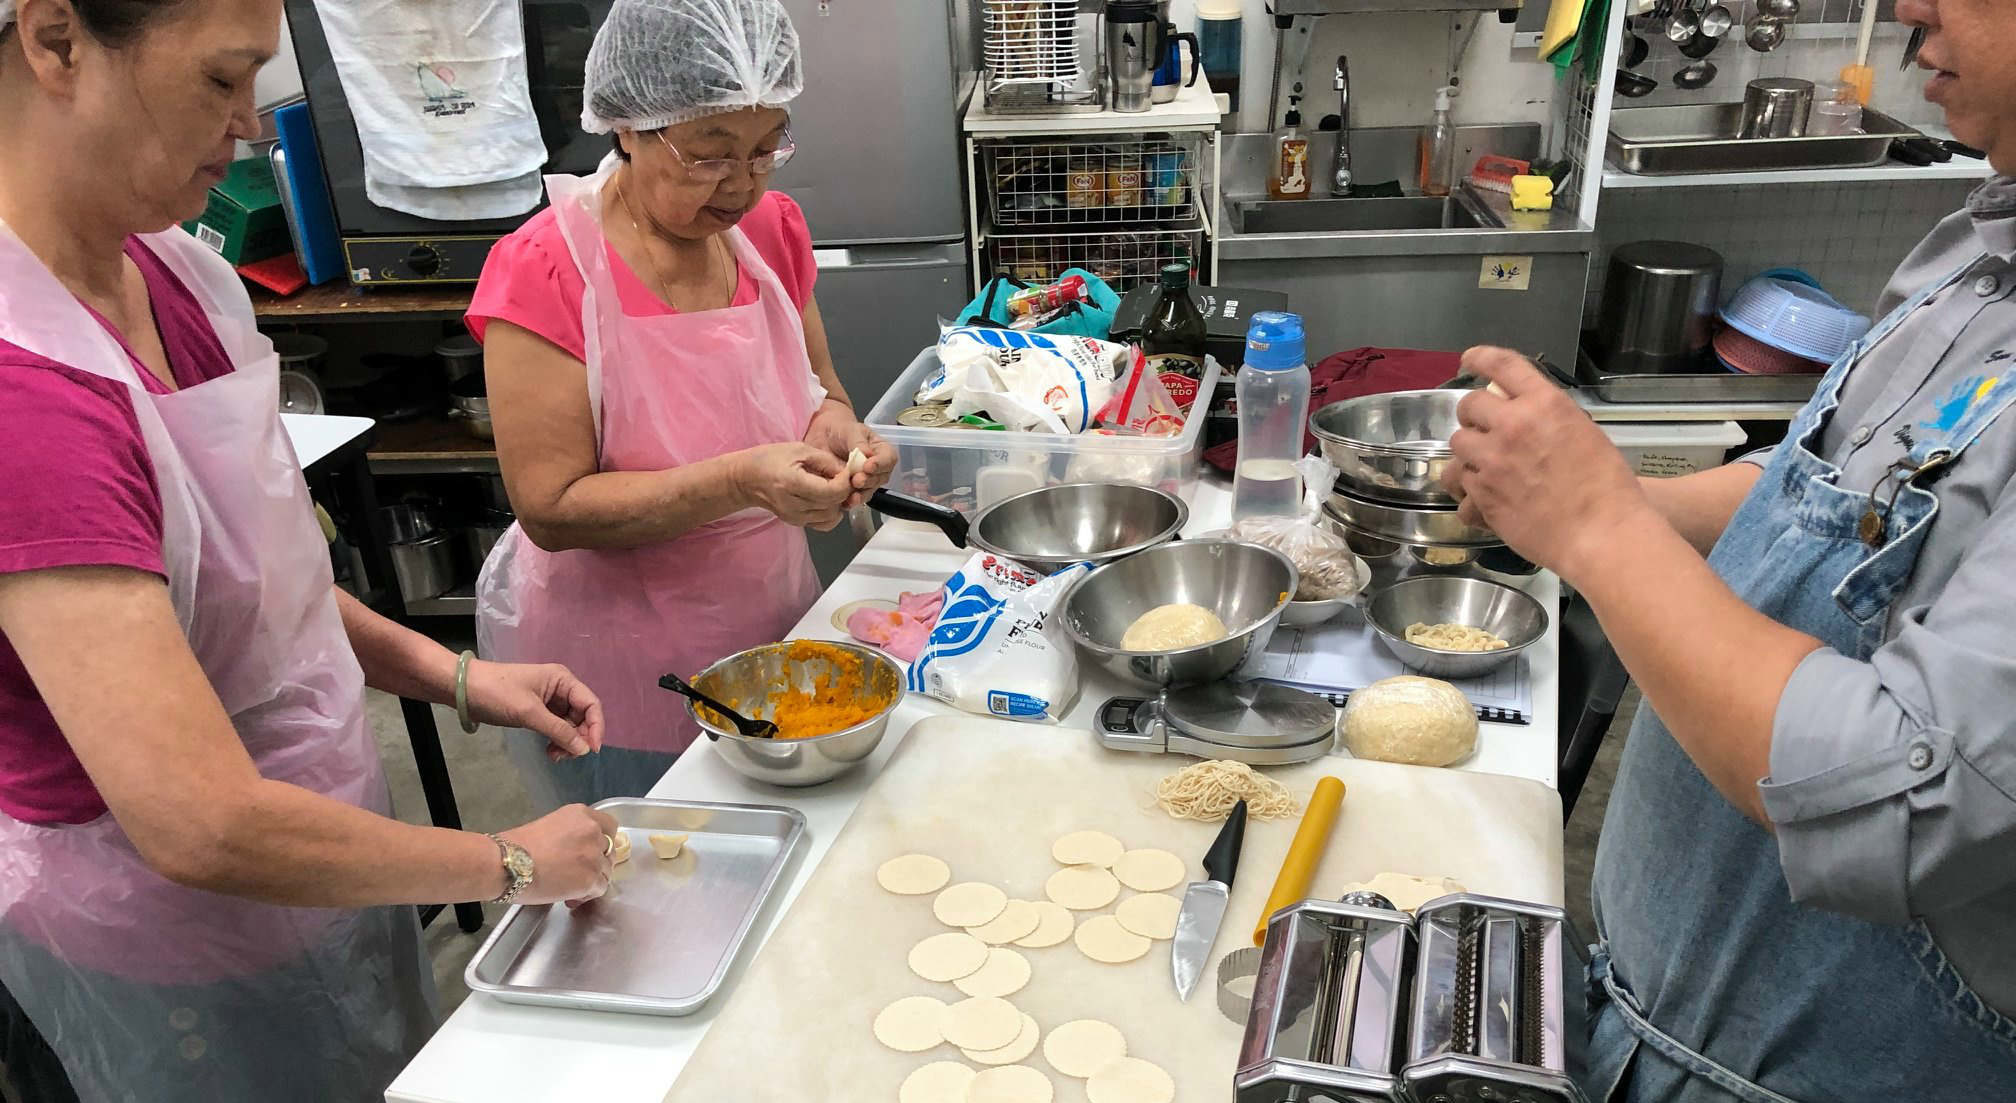 A culinary class being conducted by social enterprise Dignity Kitchen. Photo: Dignity Kitchen/Facebook